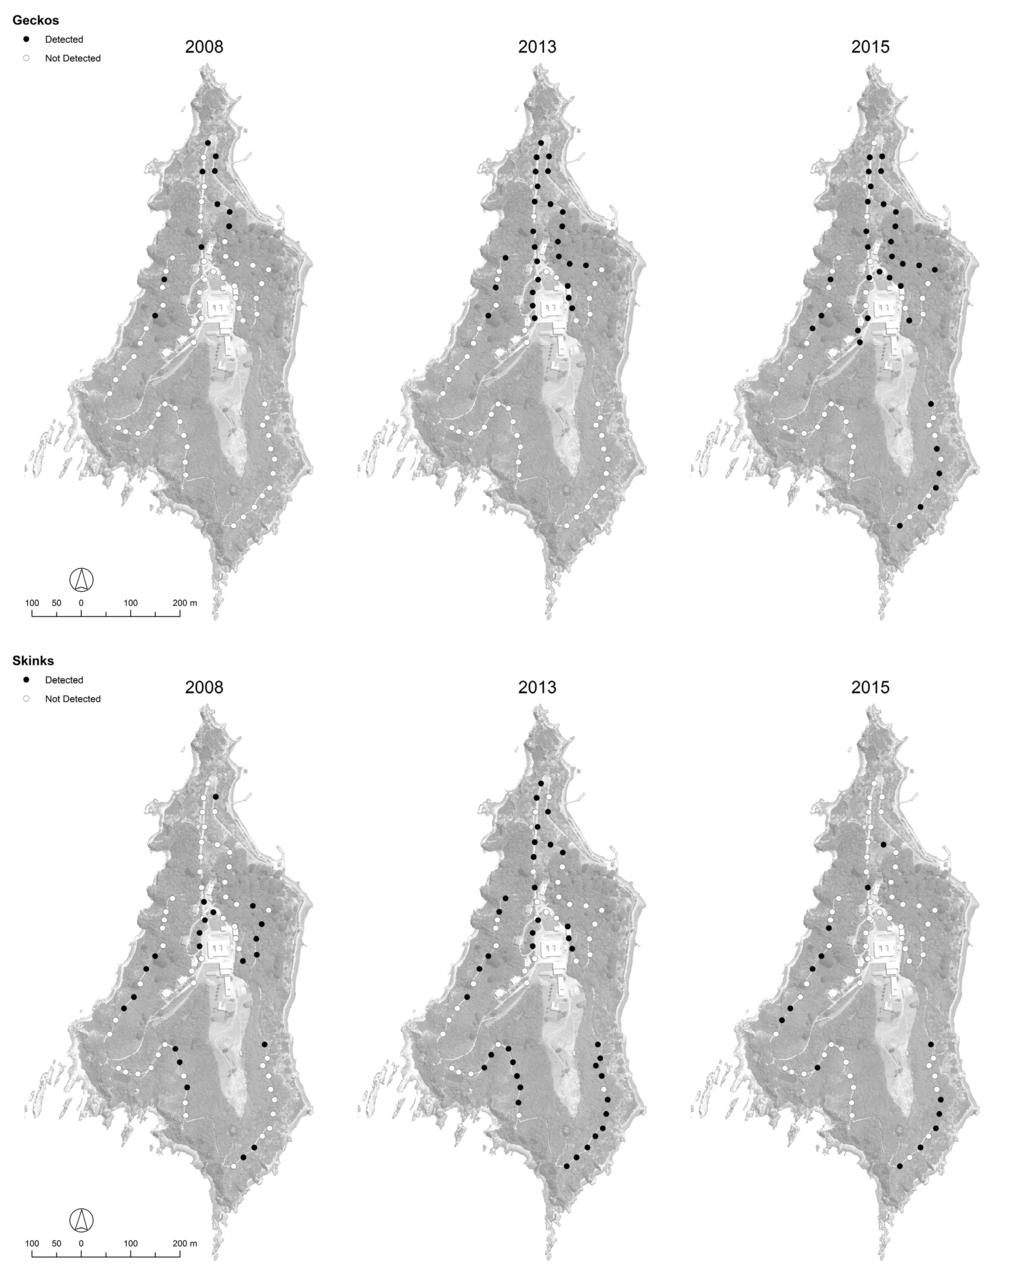 178 C. WATTS, D. THORNBURROW, I. STRINGER AND V. CAVE Fig. 5. Distribution of geckos and skinks as detected using tracking tunnels on Matiu/Somes Island.